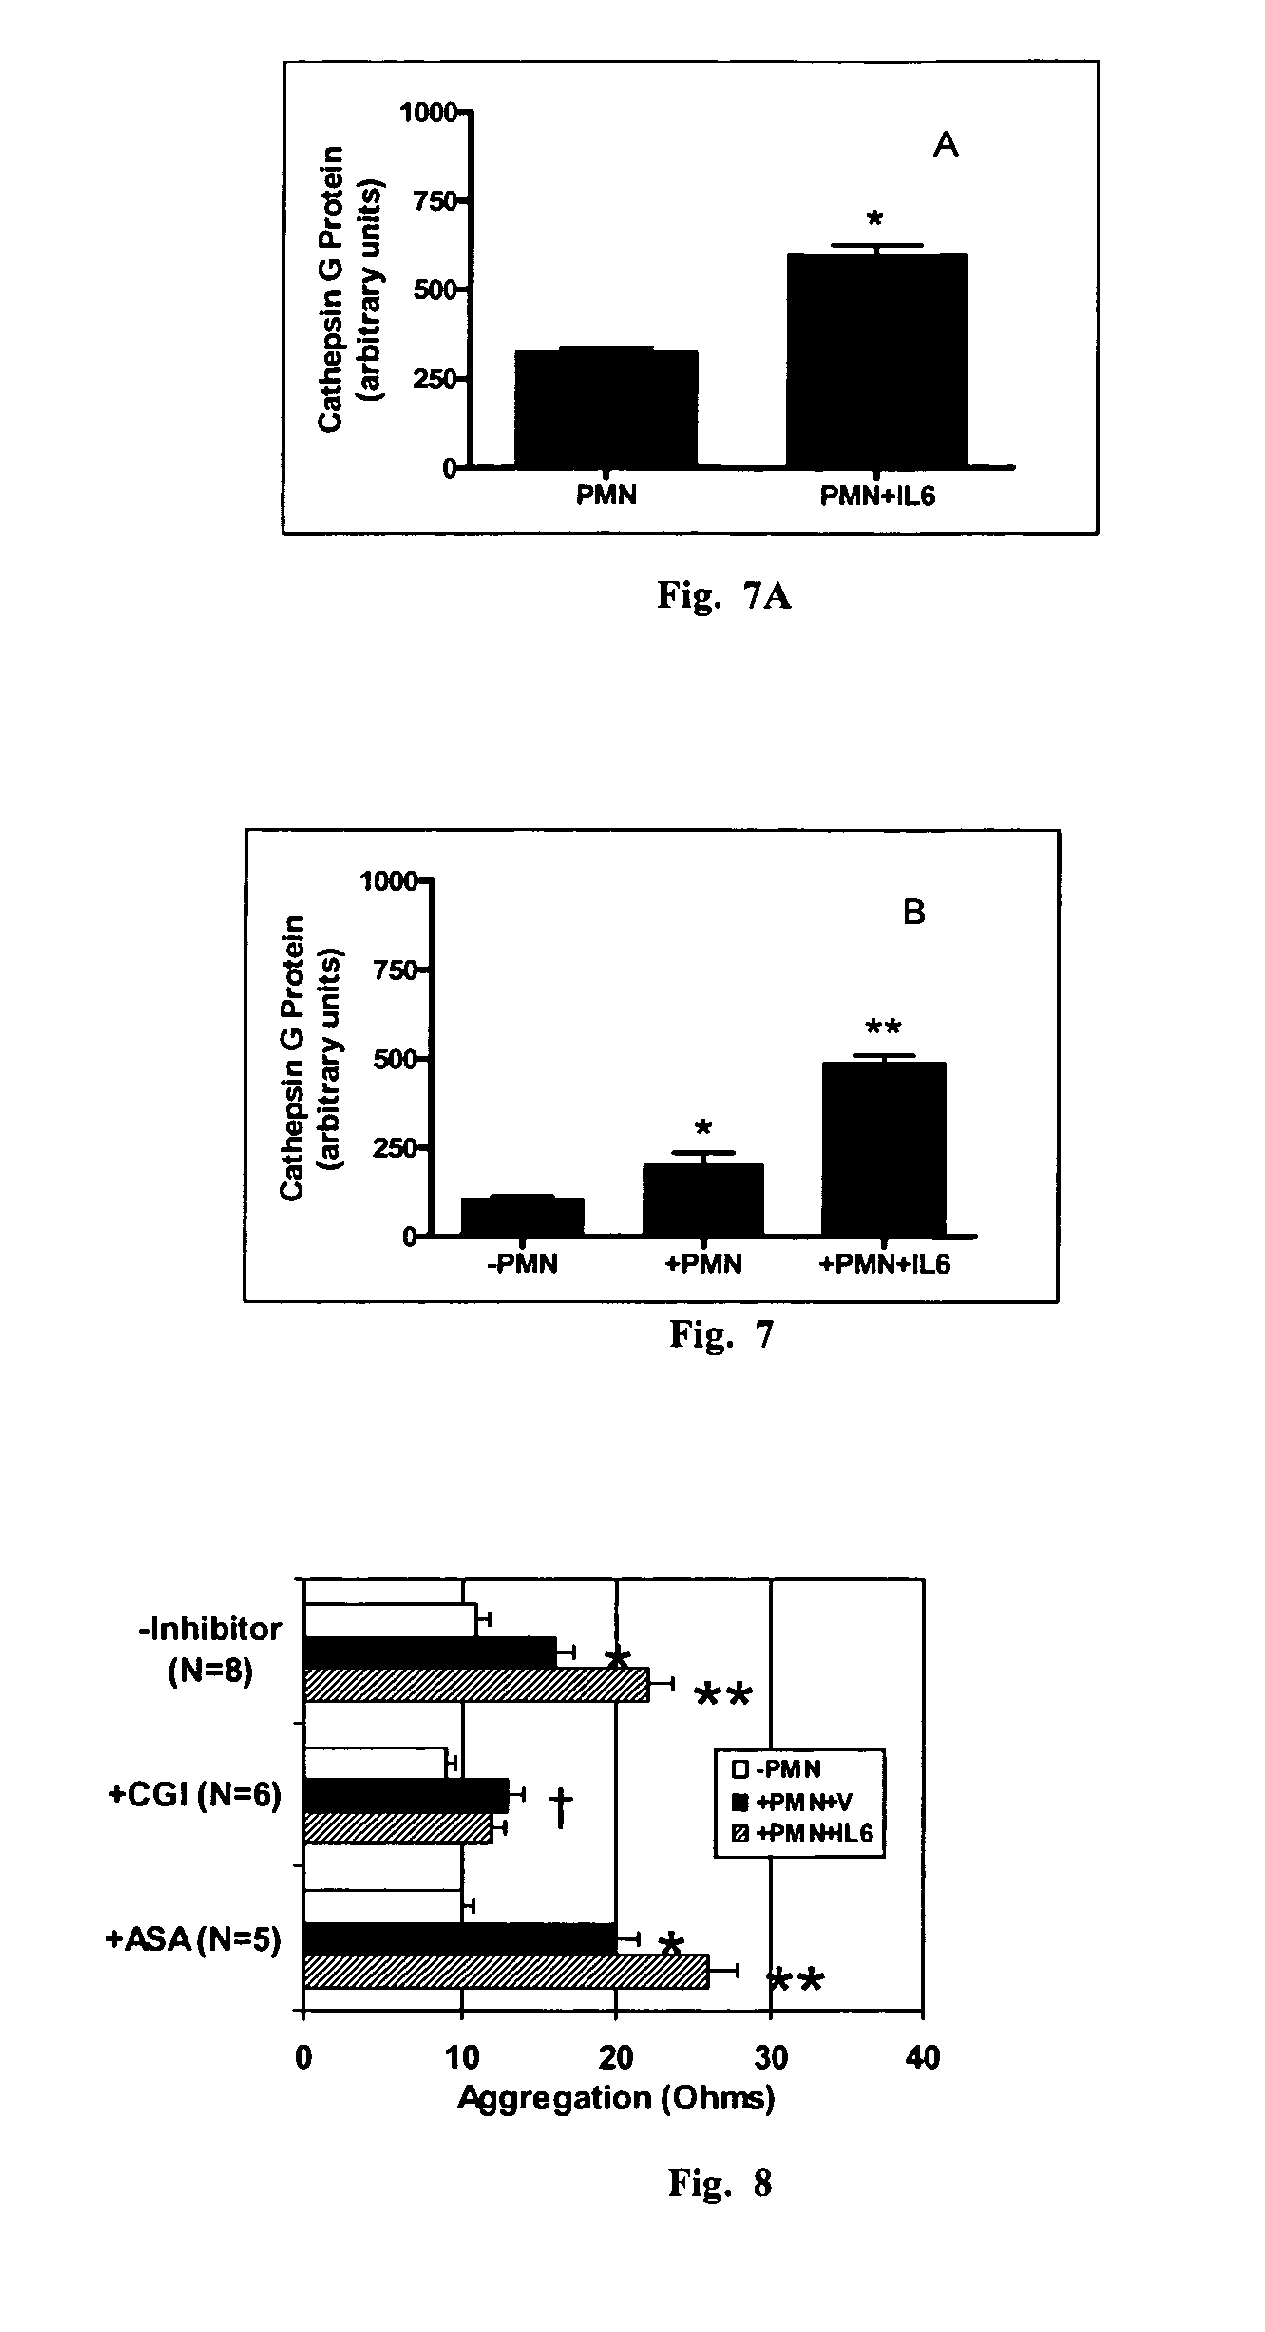 Method of inhibiting platelet aggregation and clot formation